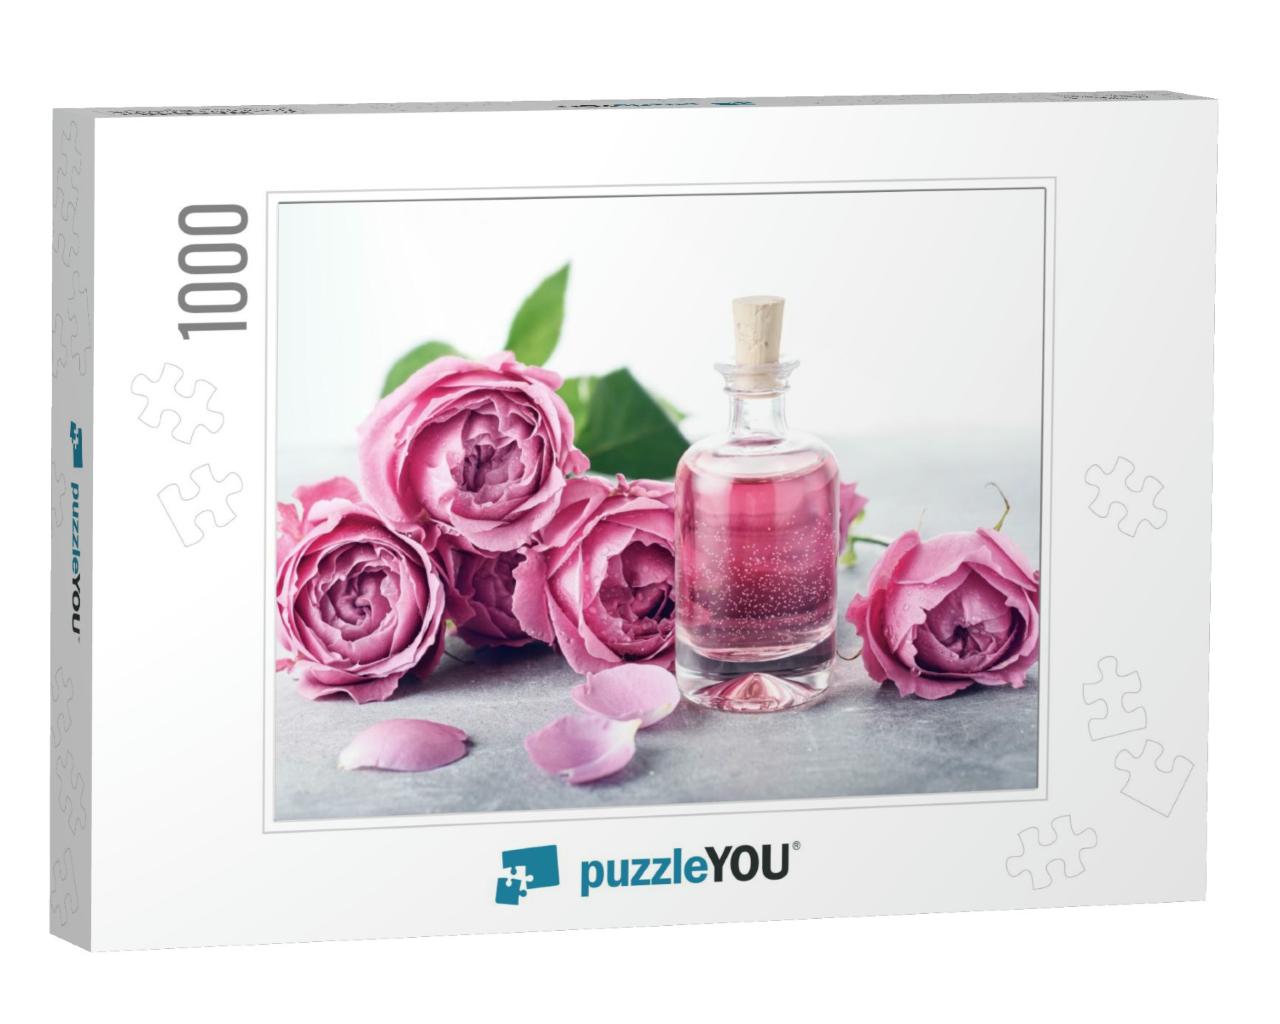 Perfumed Rose Water in Glass Bottle, Roses... Jigsaw Puzzle with 1000 pieces